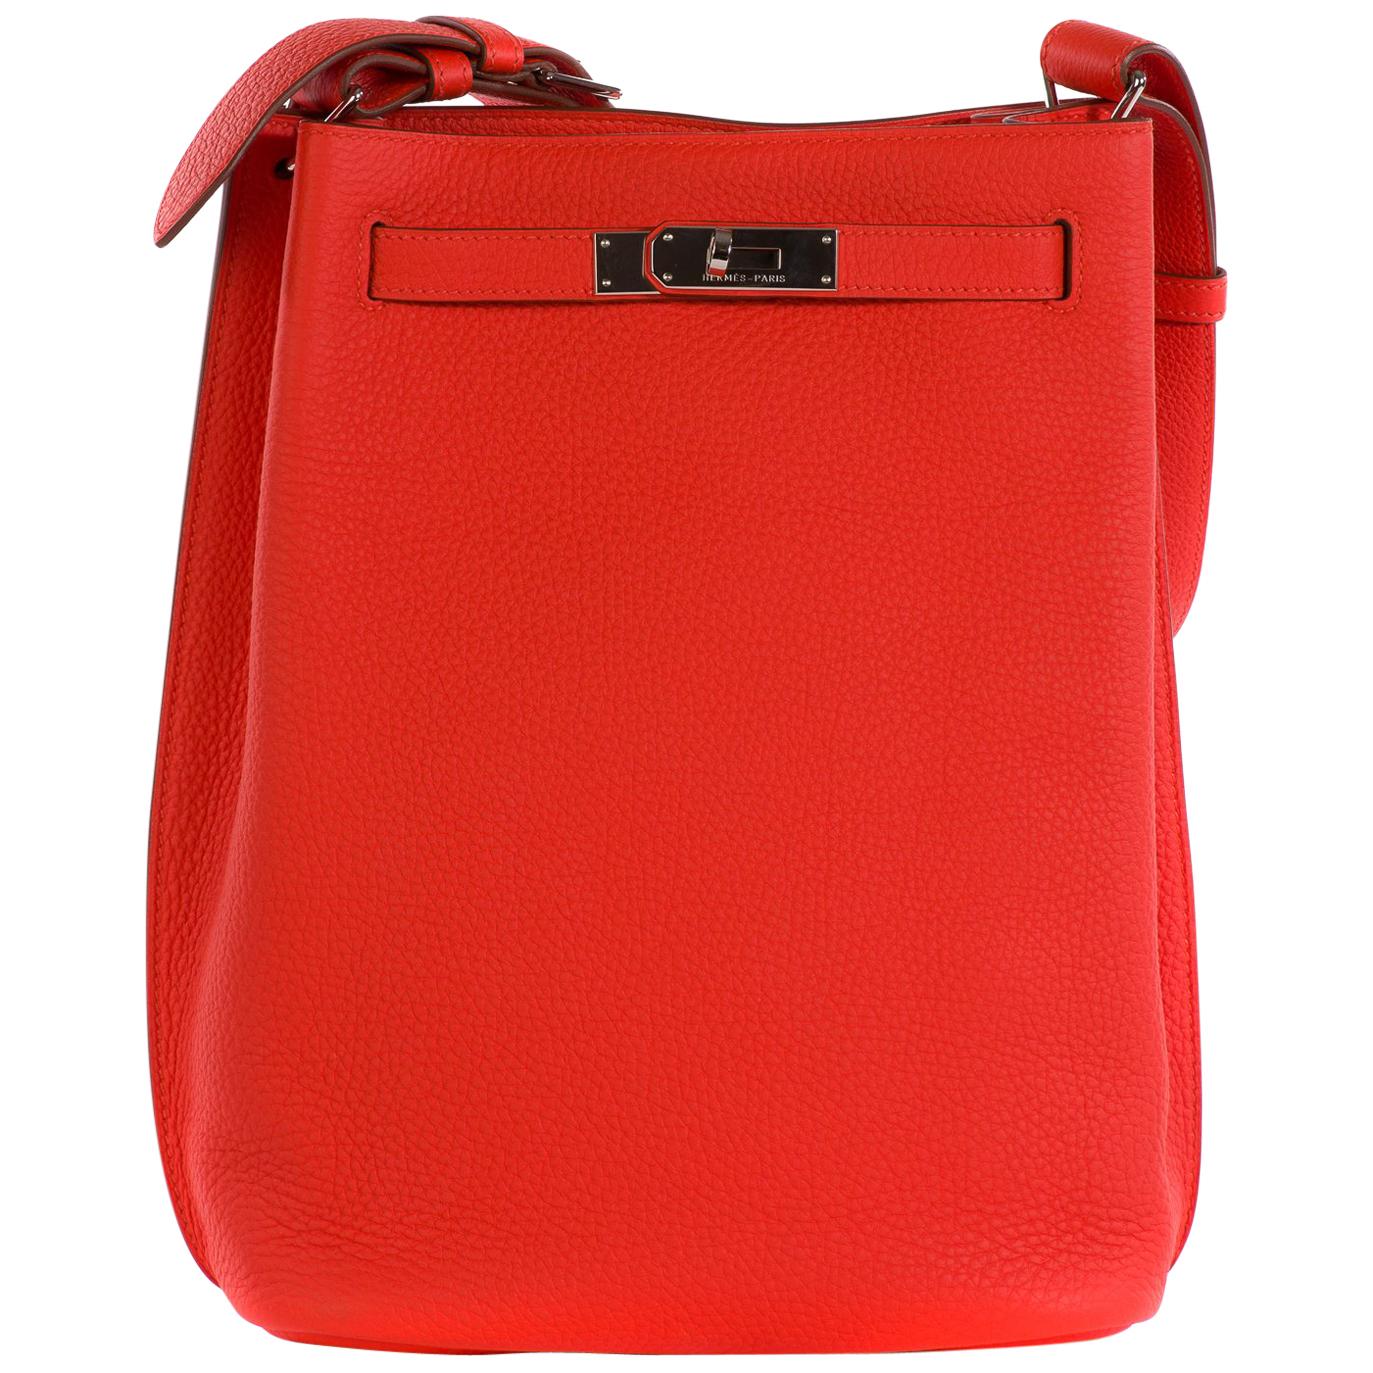 Hermes So kelly 22 Red Togo Silver hardware Q Stamp Never worn